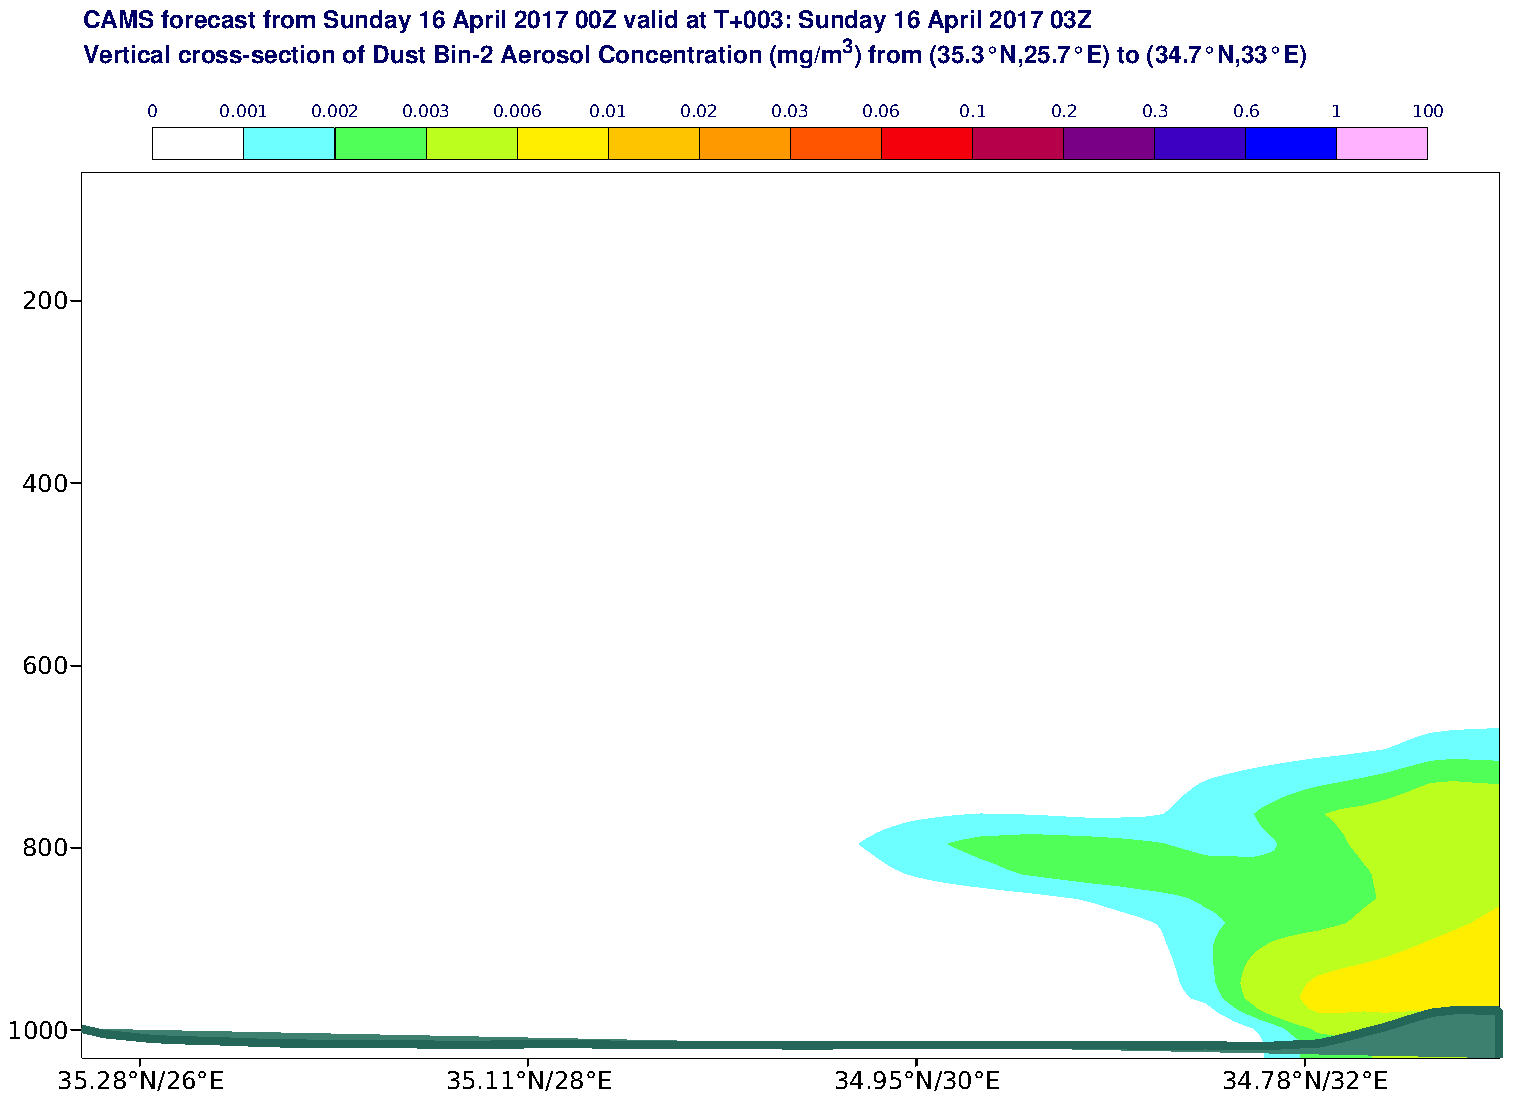 Vertical cross-section of Dust Bin-2 Aerosol Concentration (mg/m3) valid at T3 - 2017-04-16 03:00